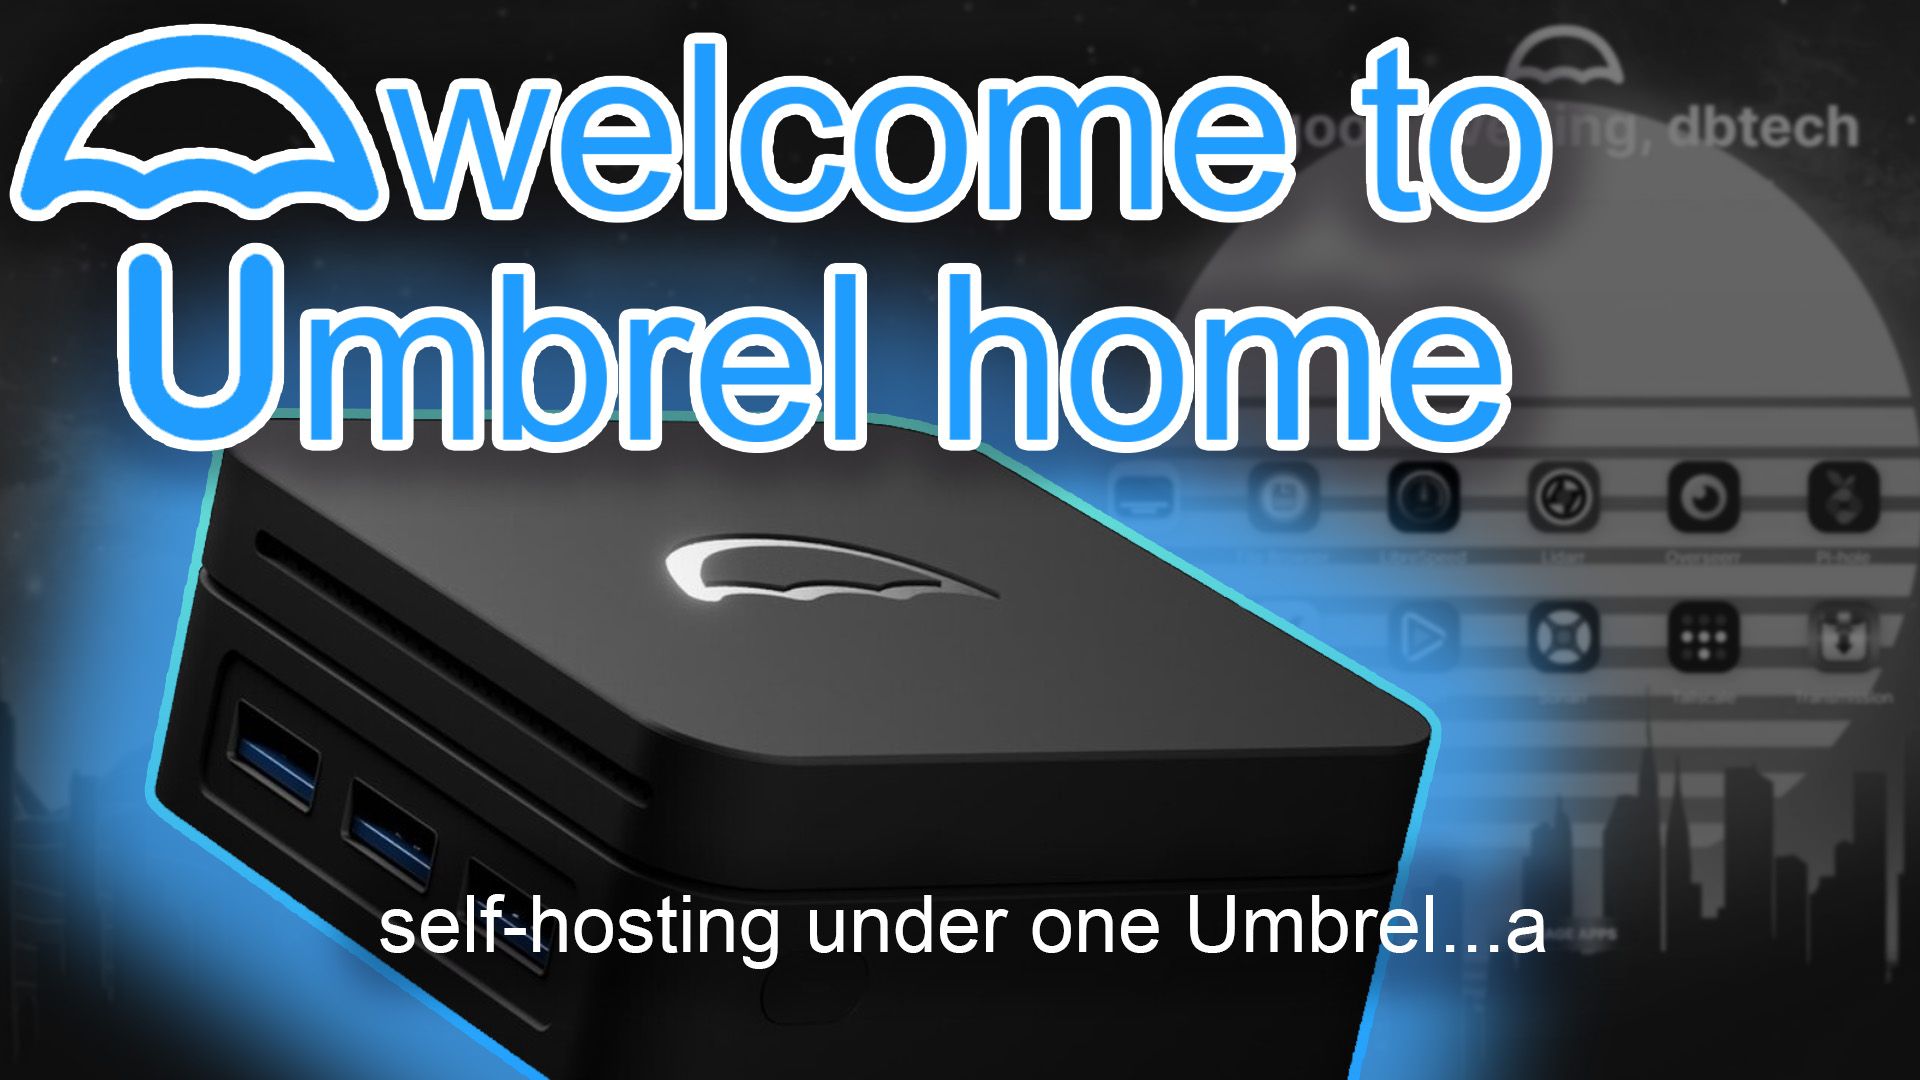 Umbrel Home Unboxing and First Impressions